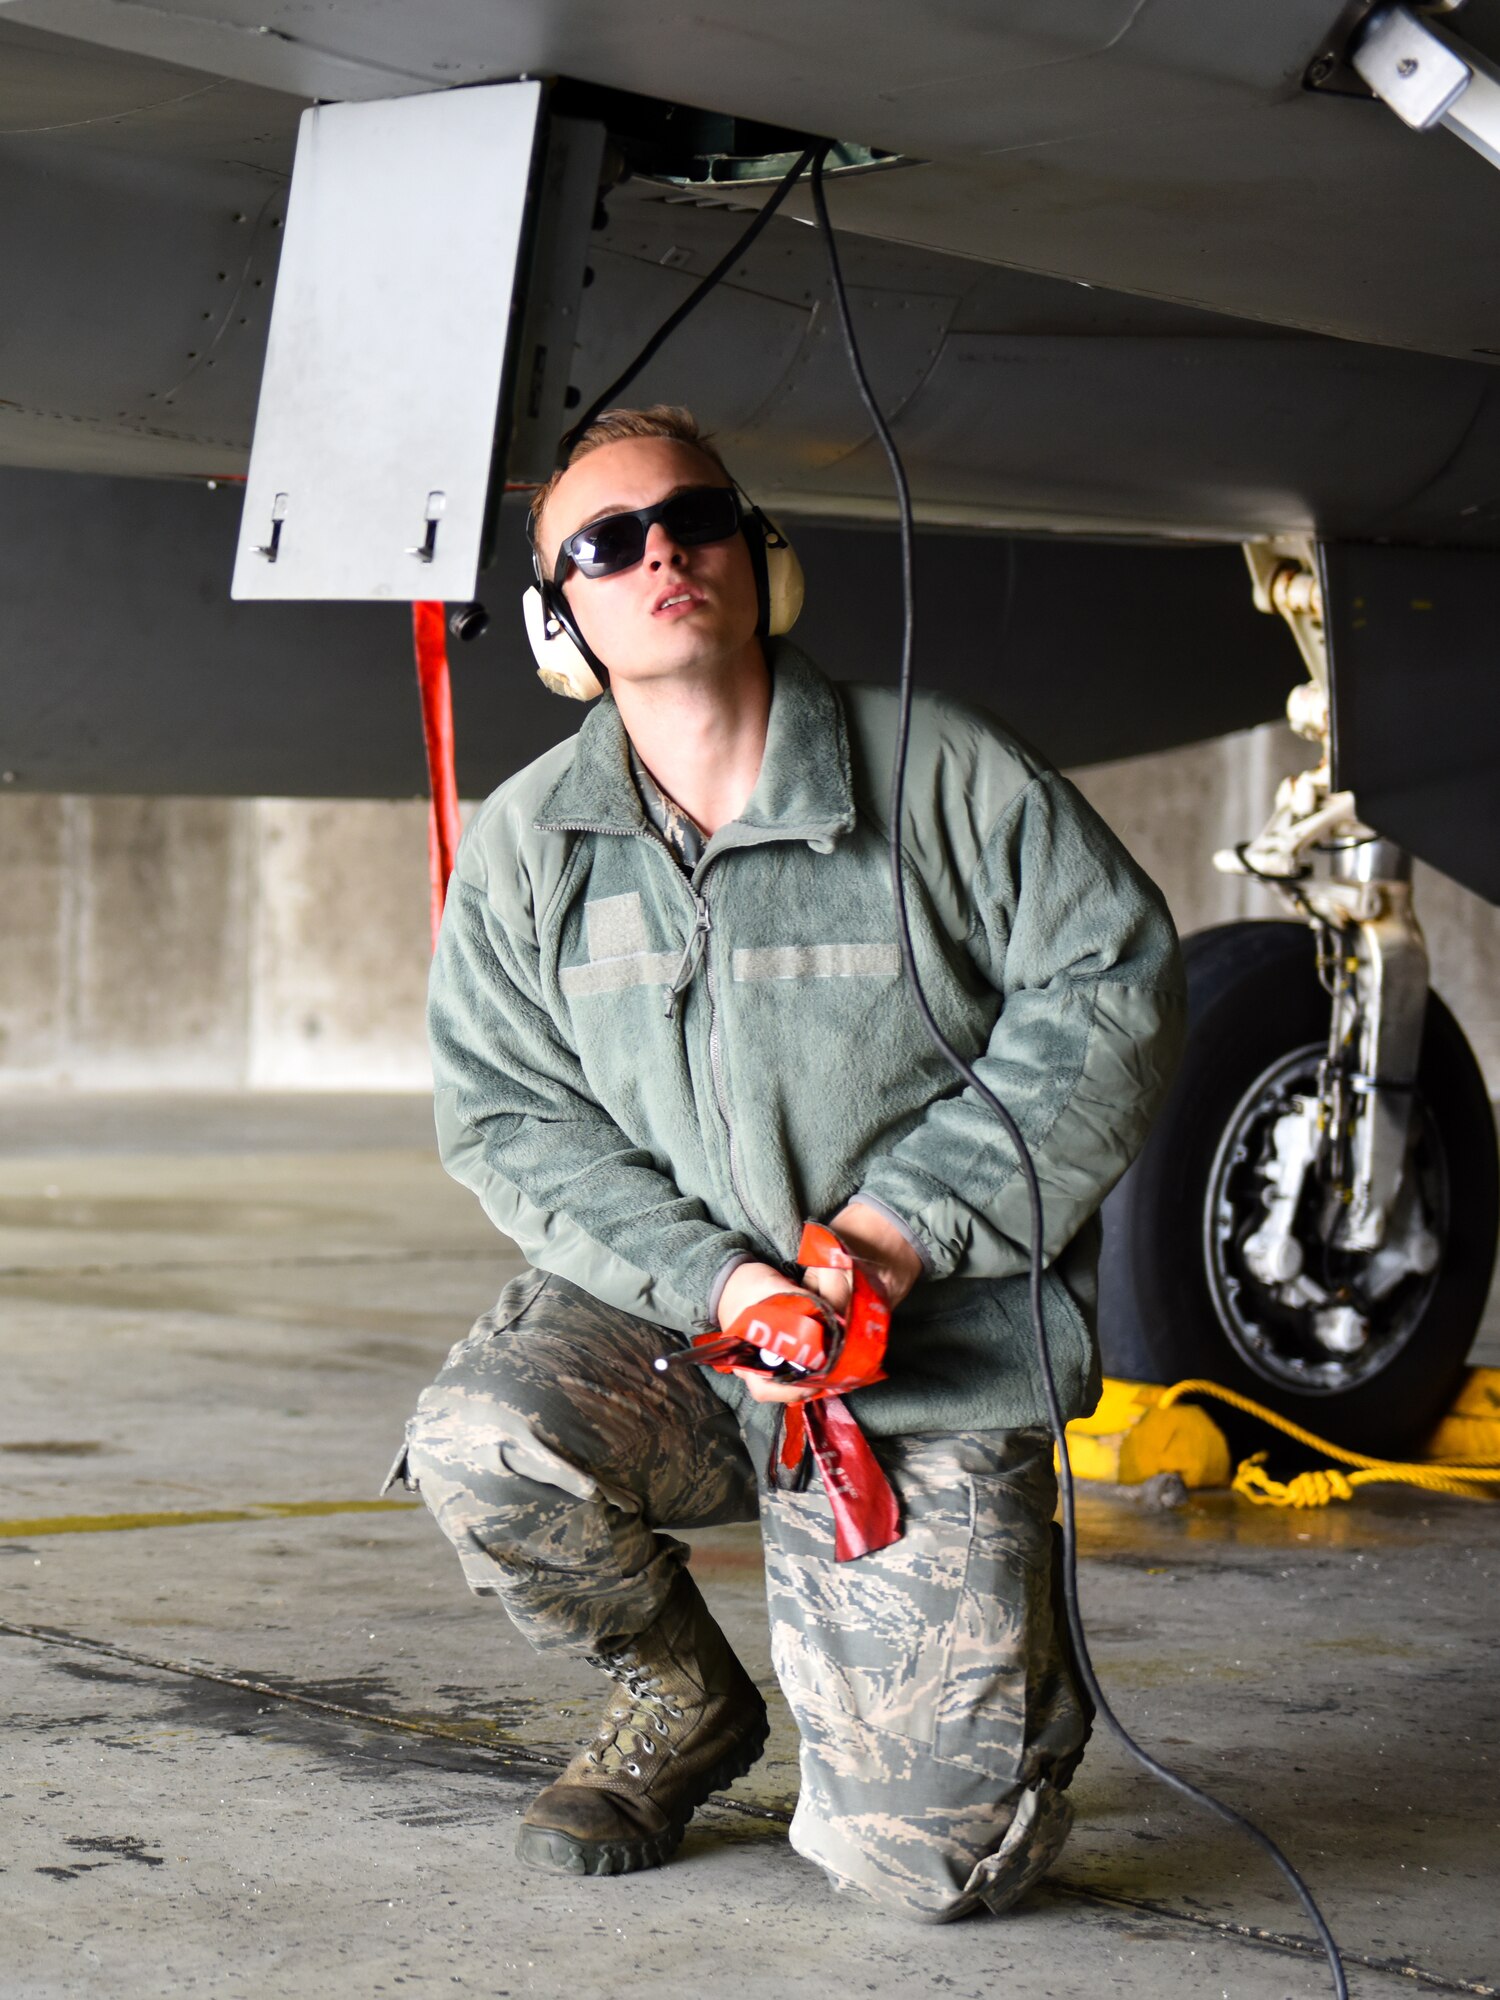 An Airman assigned to the 748th Aircraft Maintenance Squadron prepares an F-15C Eagle for departure at Keflavik Air Base, Iceland, Aug. 1, 2018, in support of NATO’s Icelandic Air Surveillance mission. Deployed from Royal Air Force Lakenheath, England, more than 150 maintainers from the 748th AMXS are facilitating the peacetime preparedness needs and bolstering the security and defense of Iceland. (U.S. Air Force photo/Staff Sgt. Alex Fox Echols III)